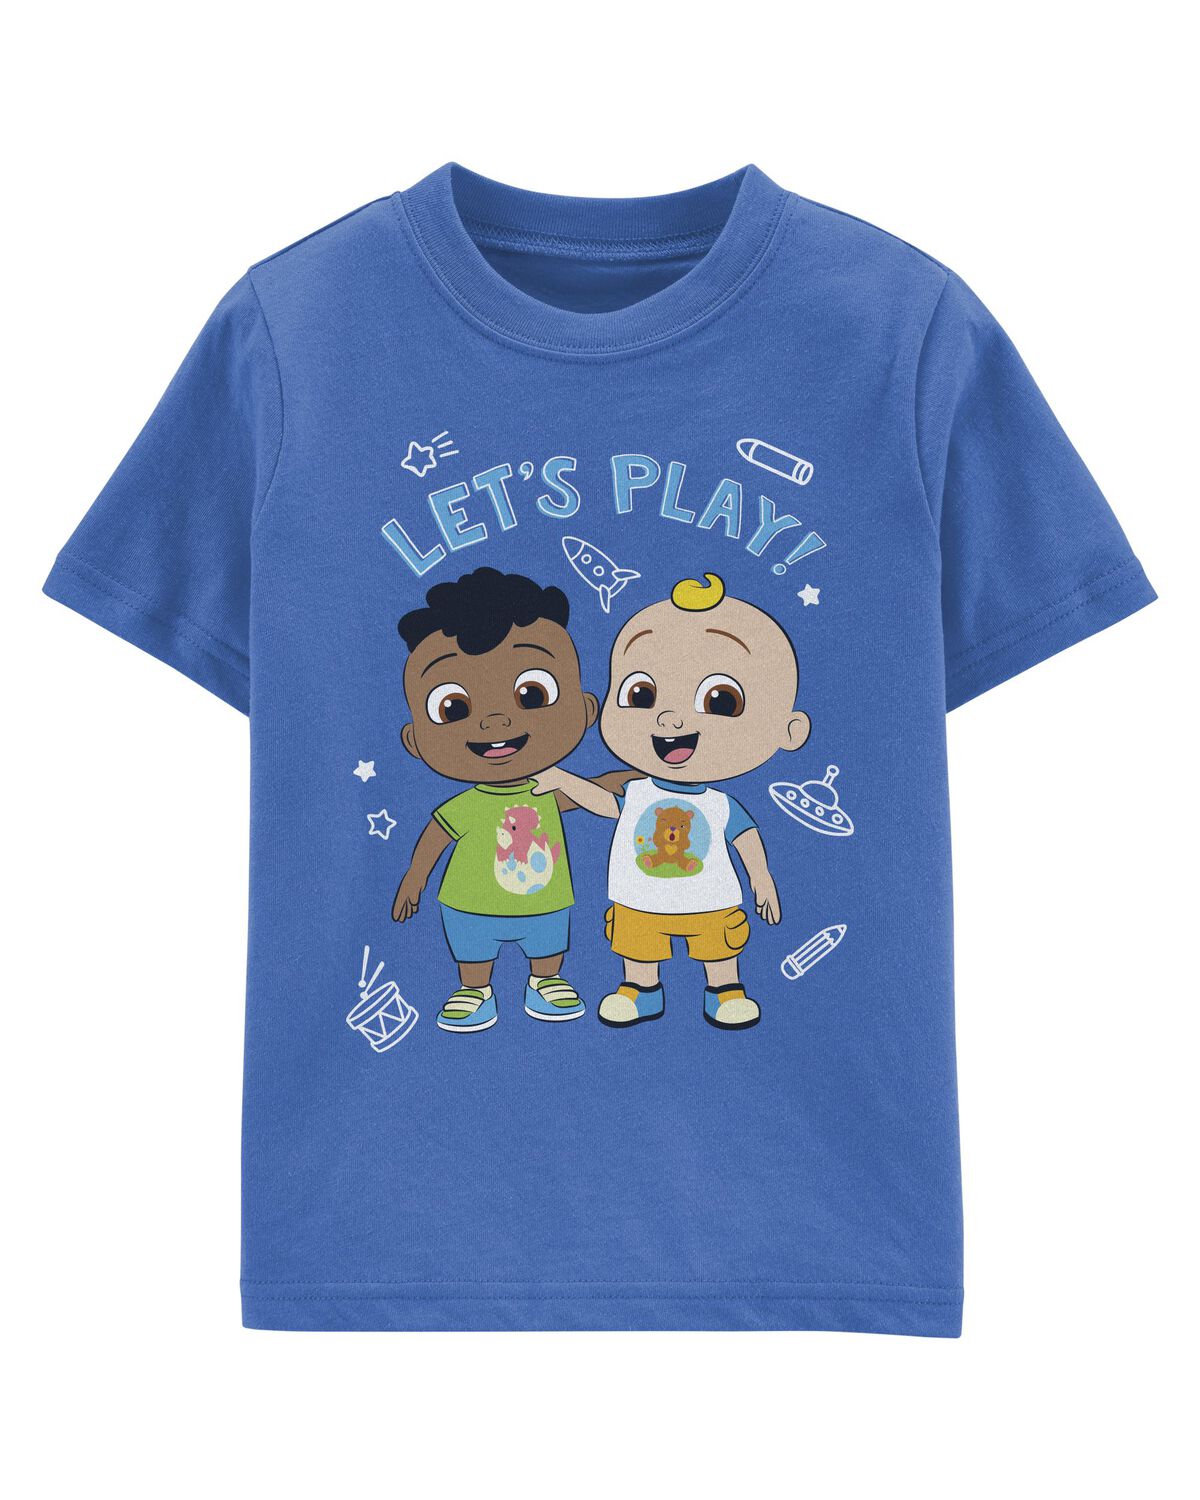 Blue Toddler CoComelon Tee | carters.com